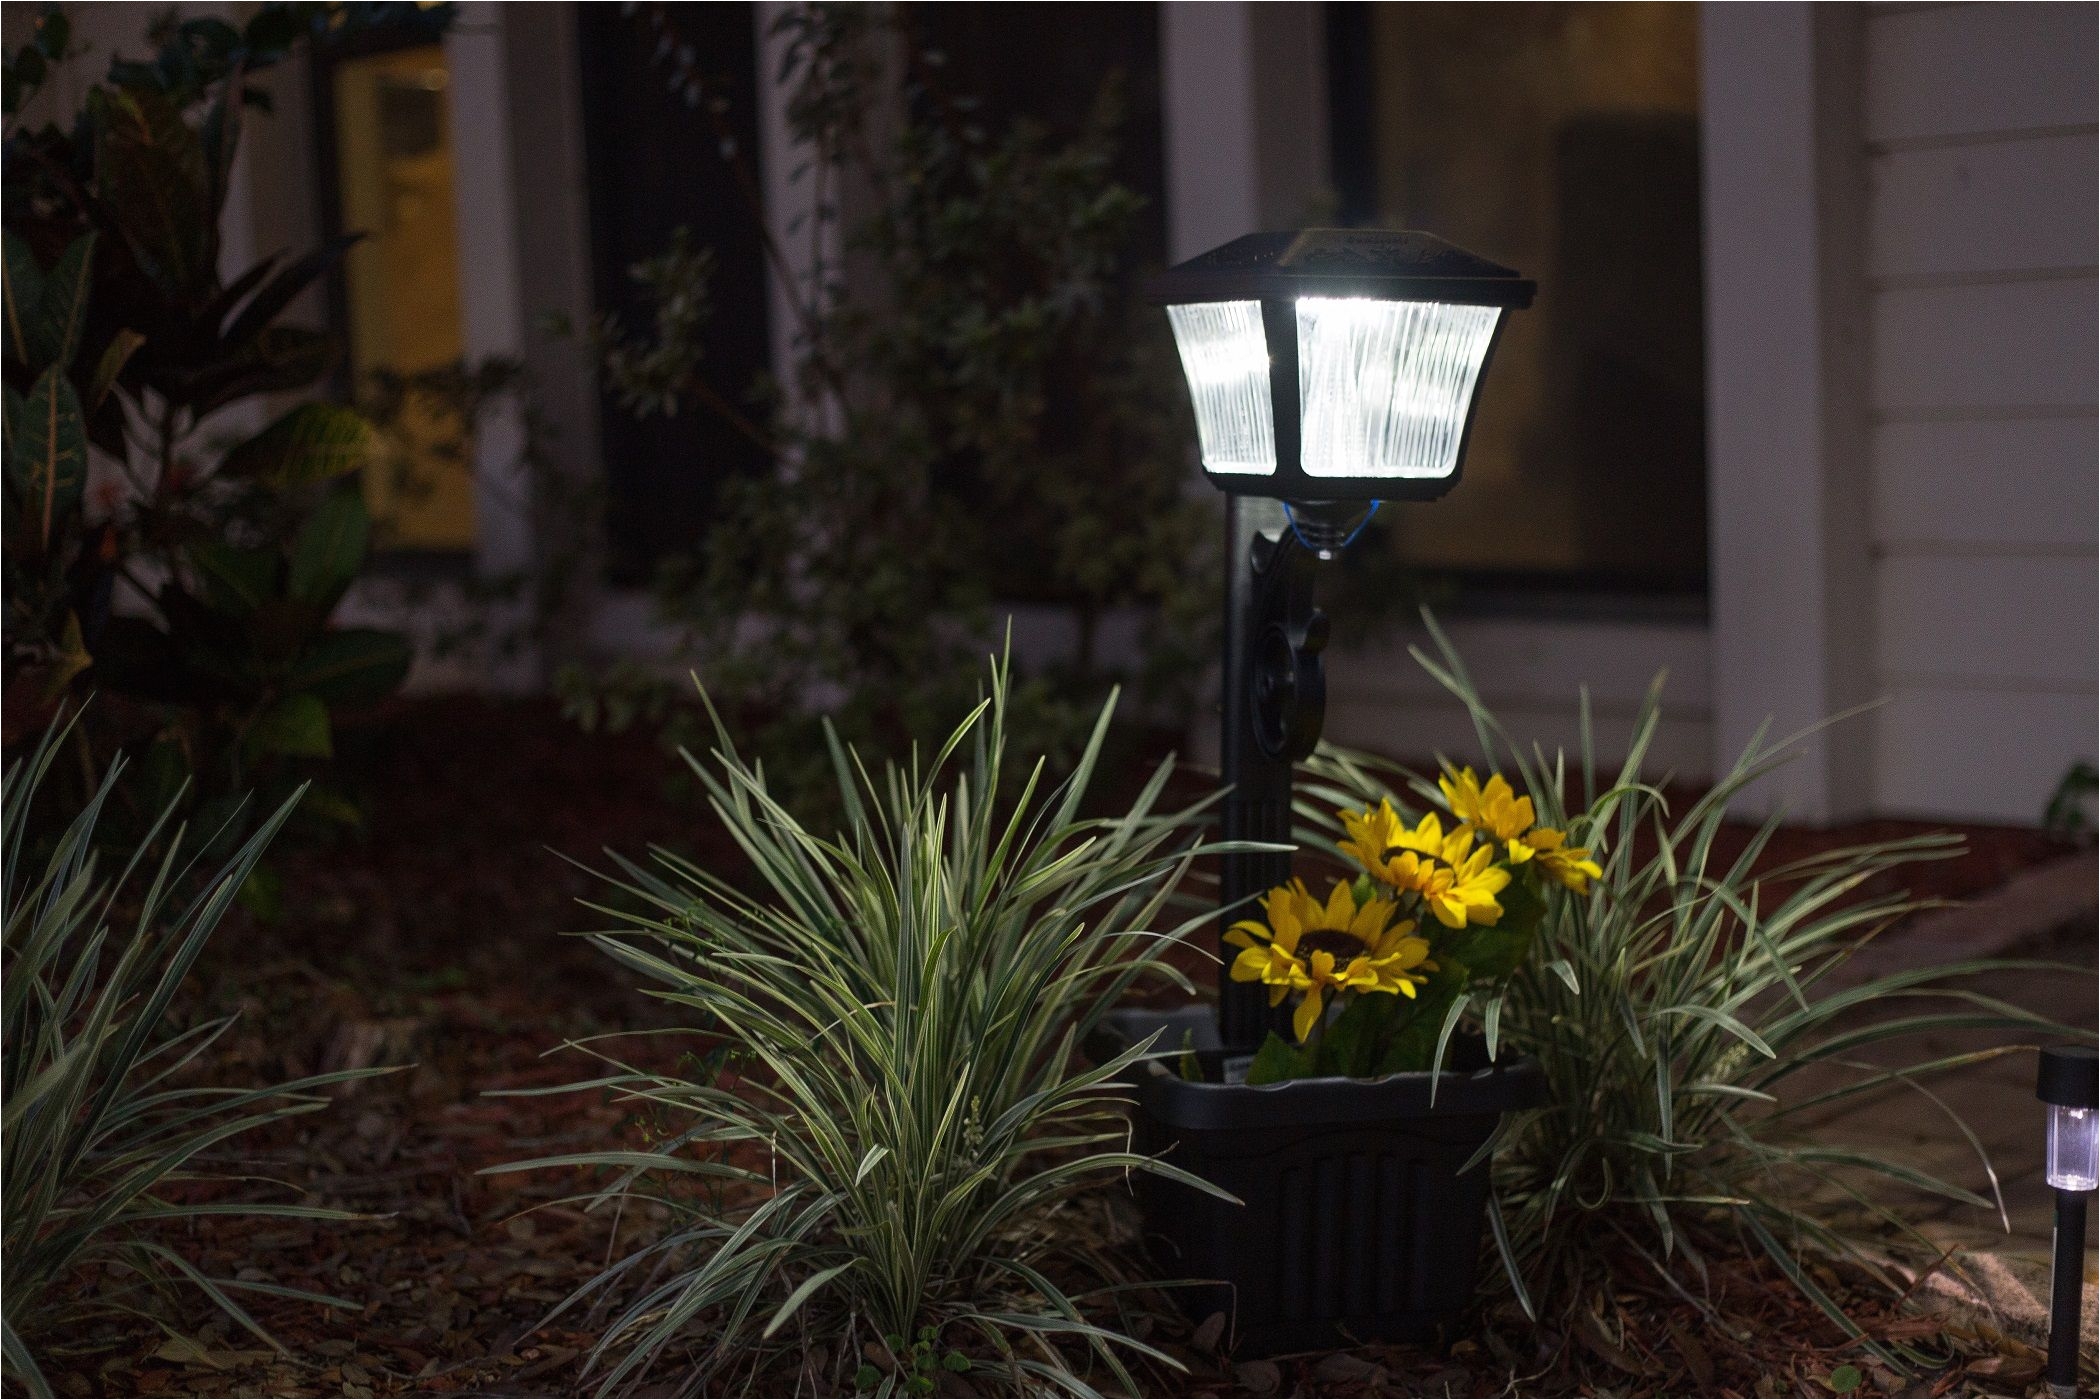 this diy and eco friendly solar powered path light is extremely simple to install and comes with attachable plantern to showcase any flowers and foliage